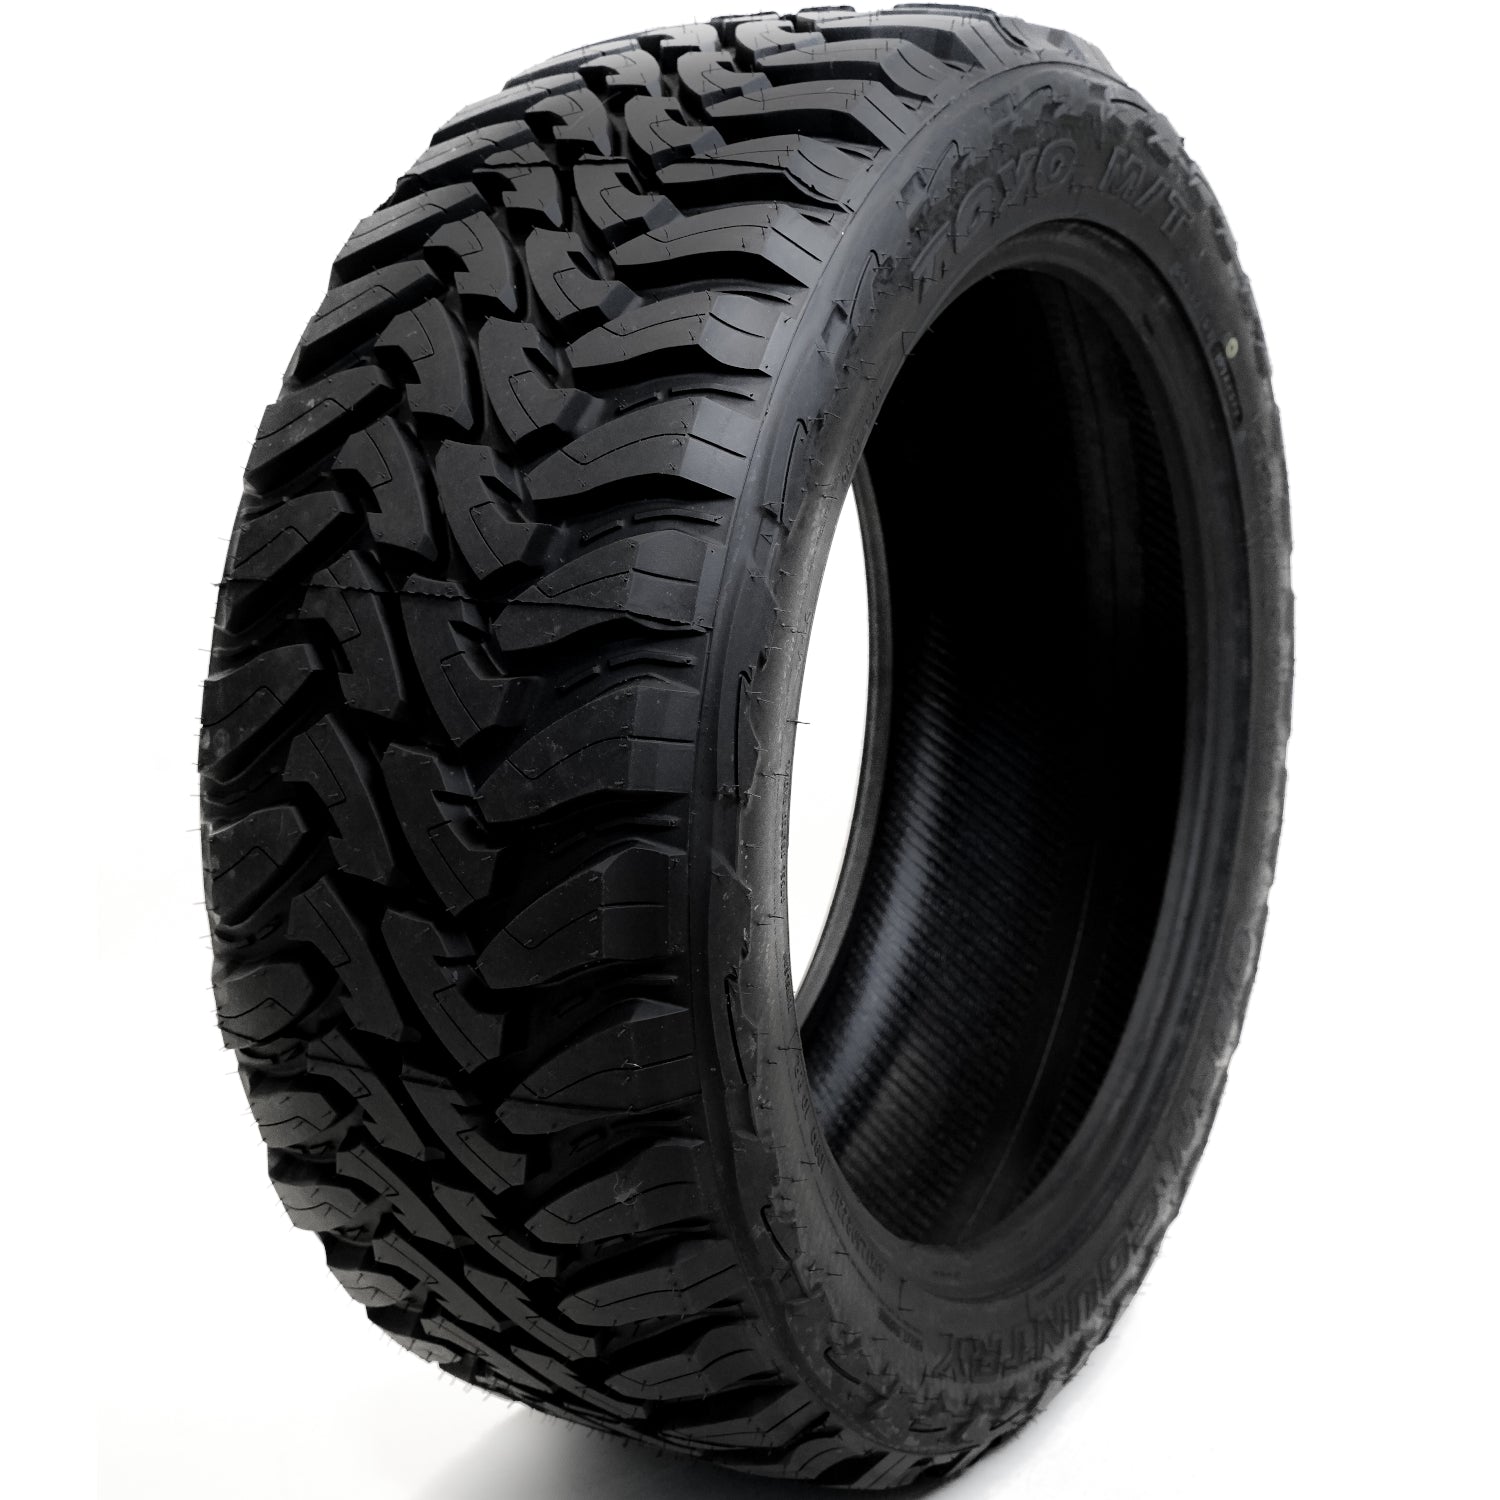 TOYO TIRES OPEN COUNTRY M/T LT375/45R22 (35.6X14.8R 22) Tires